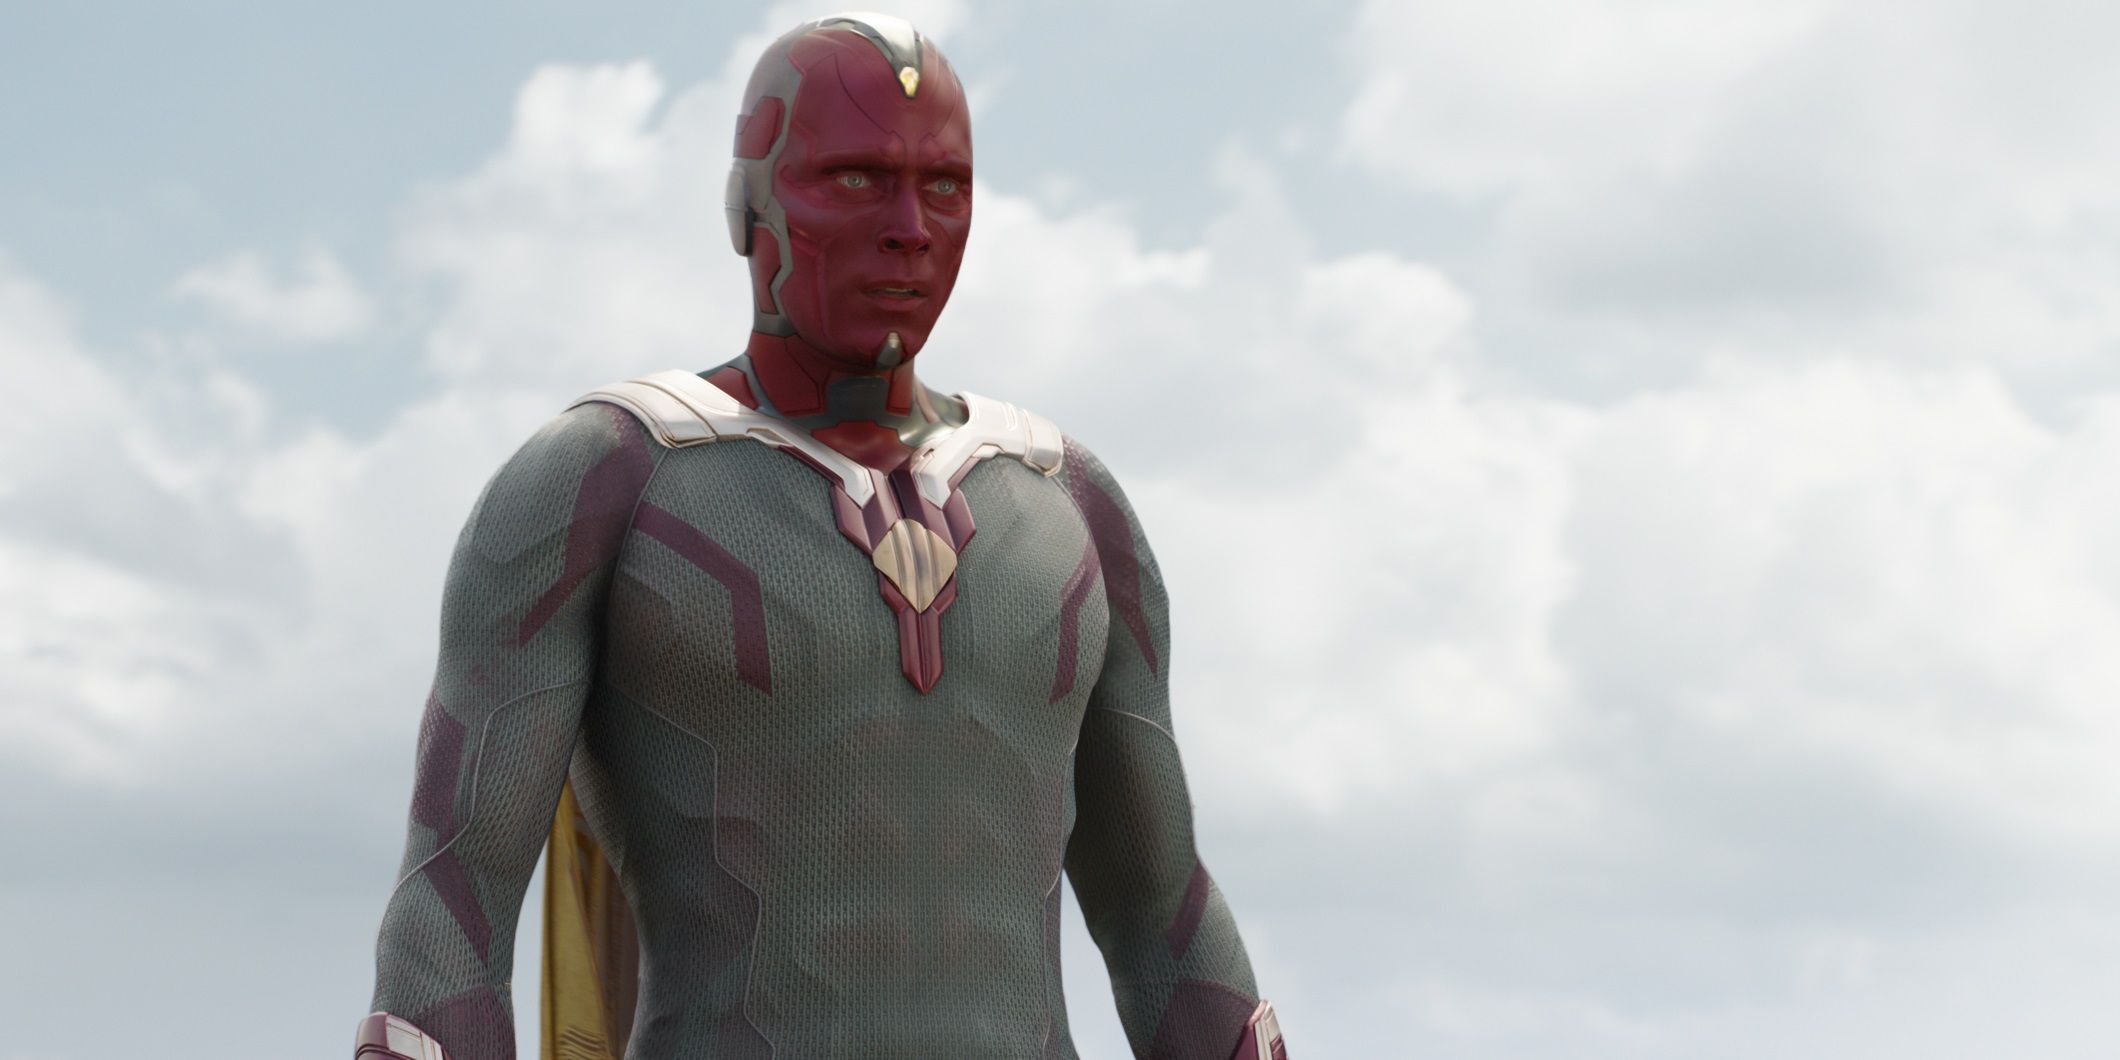 15 Smartest Characters In The MCU